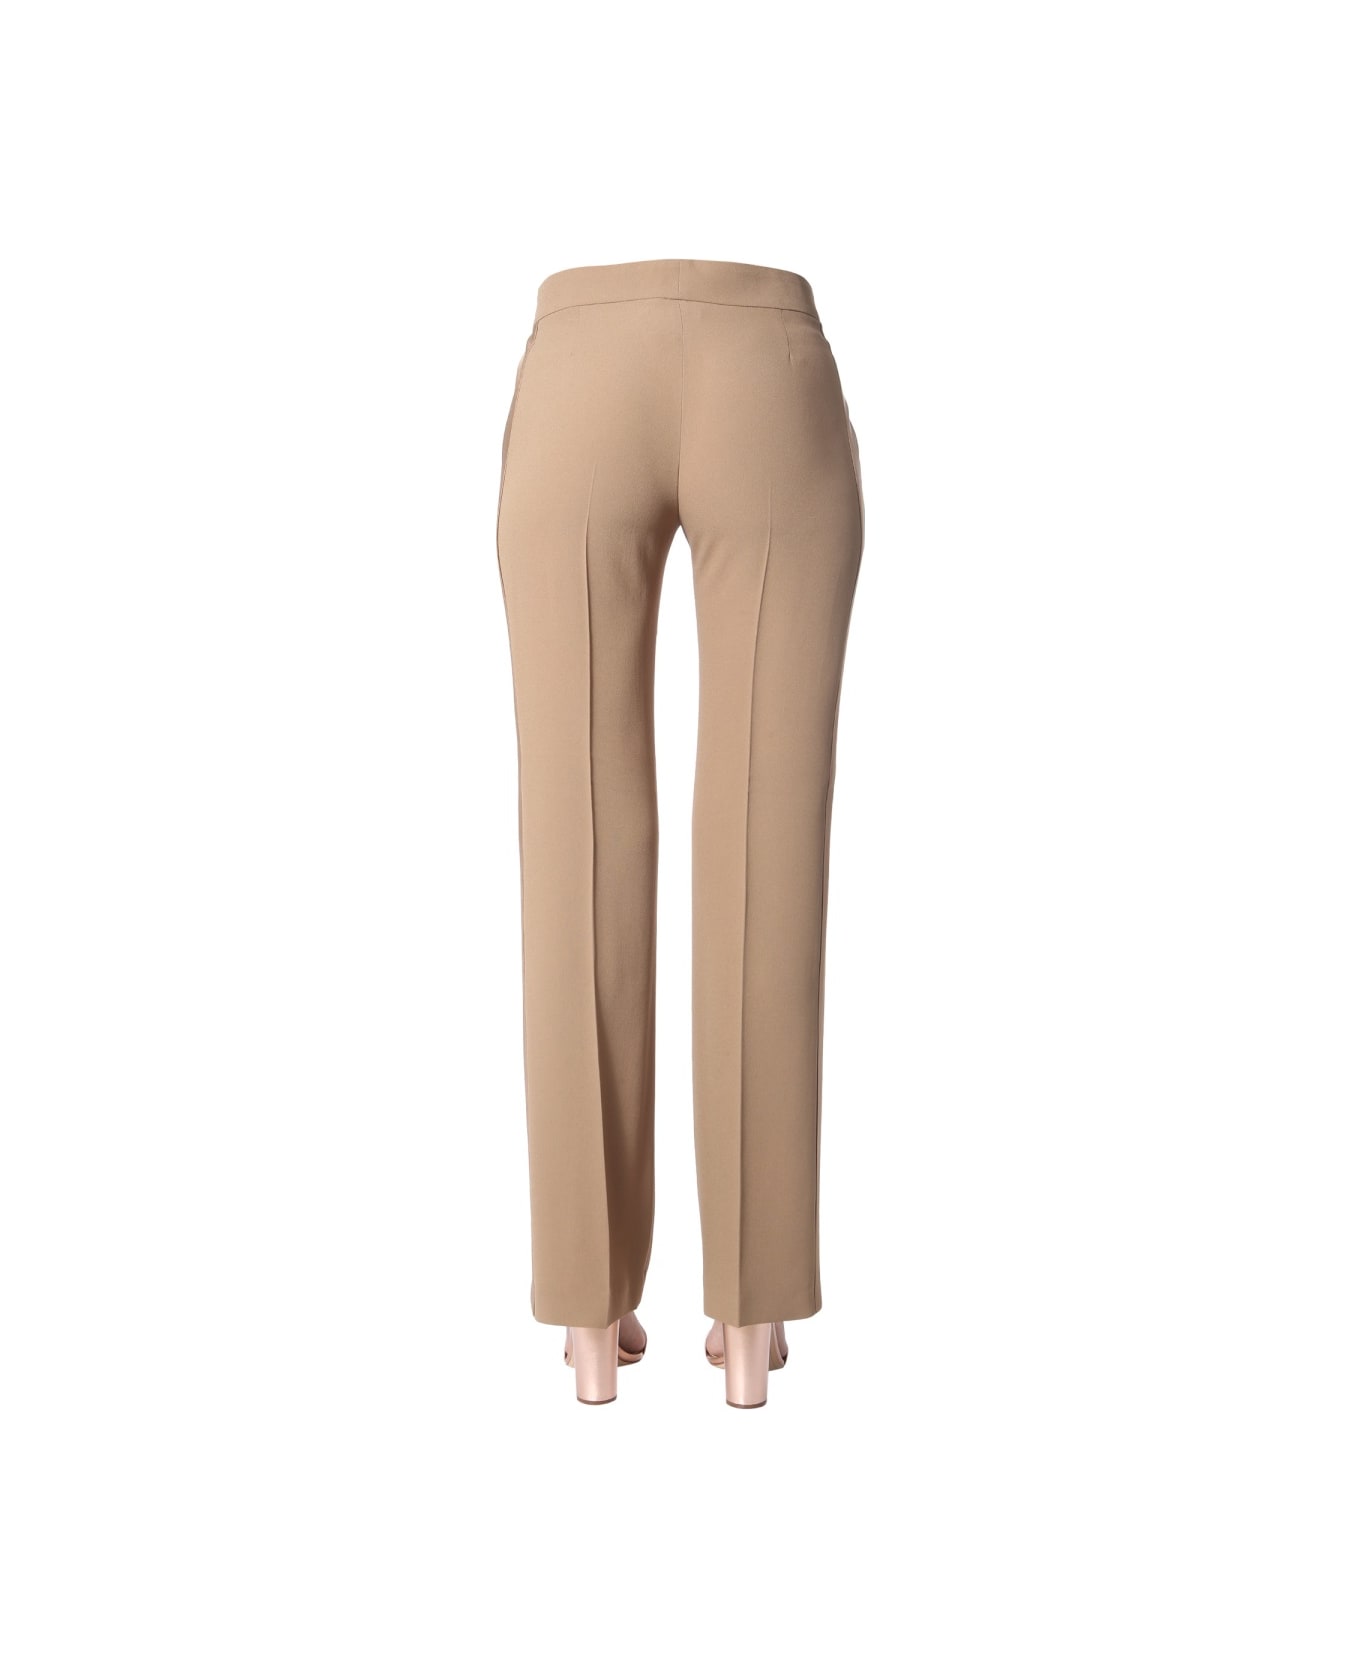 N.21 Pants With Side Band - BEIGE